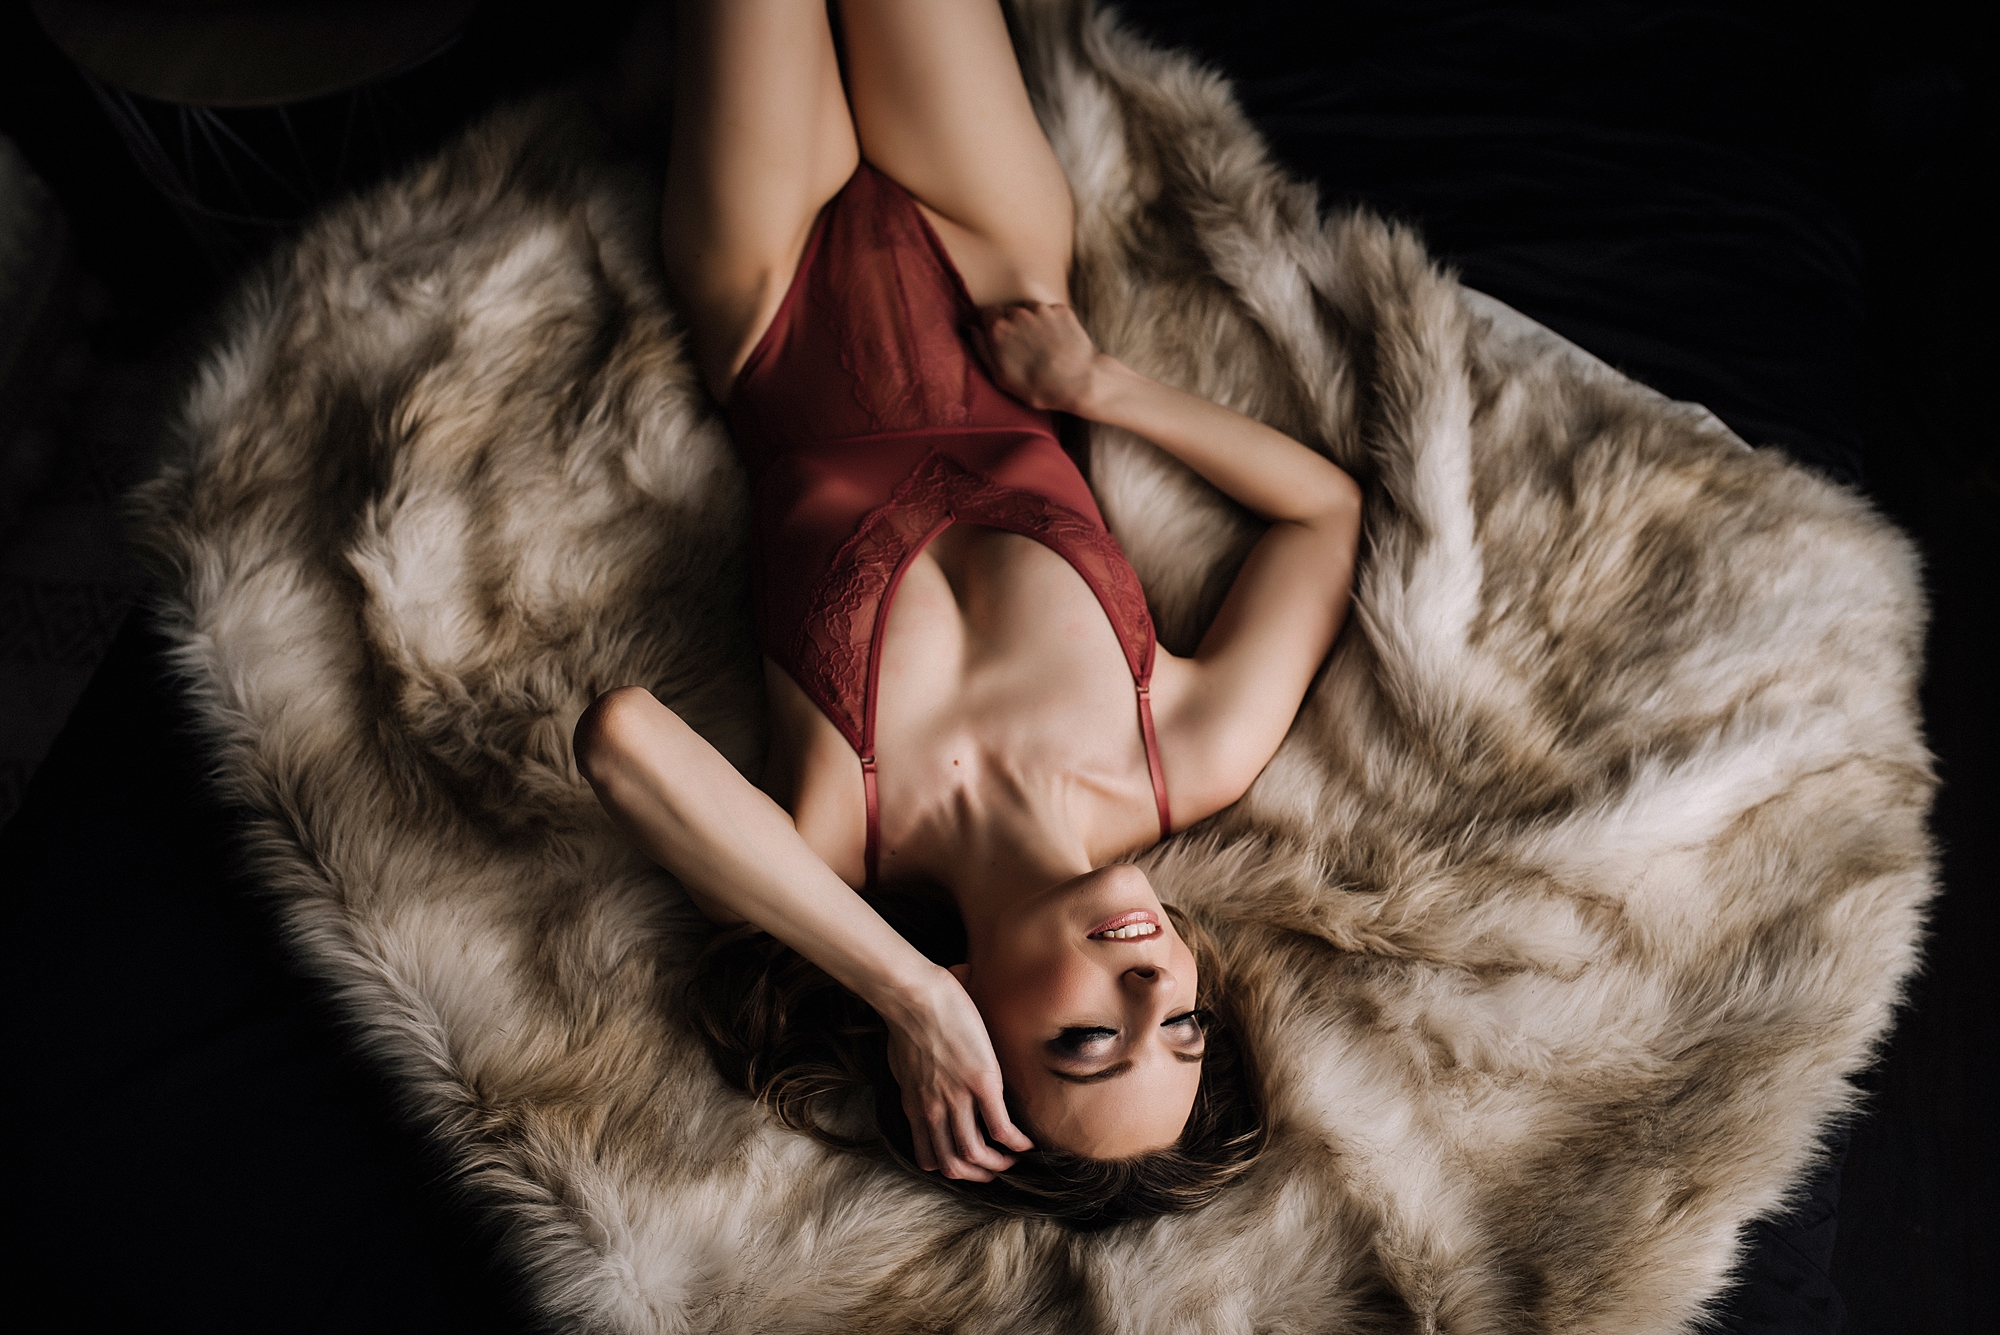 woman posing on fur blanket playing with her hair and tugging on her bodysuit